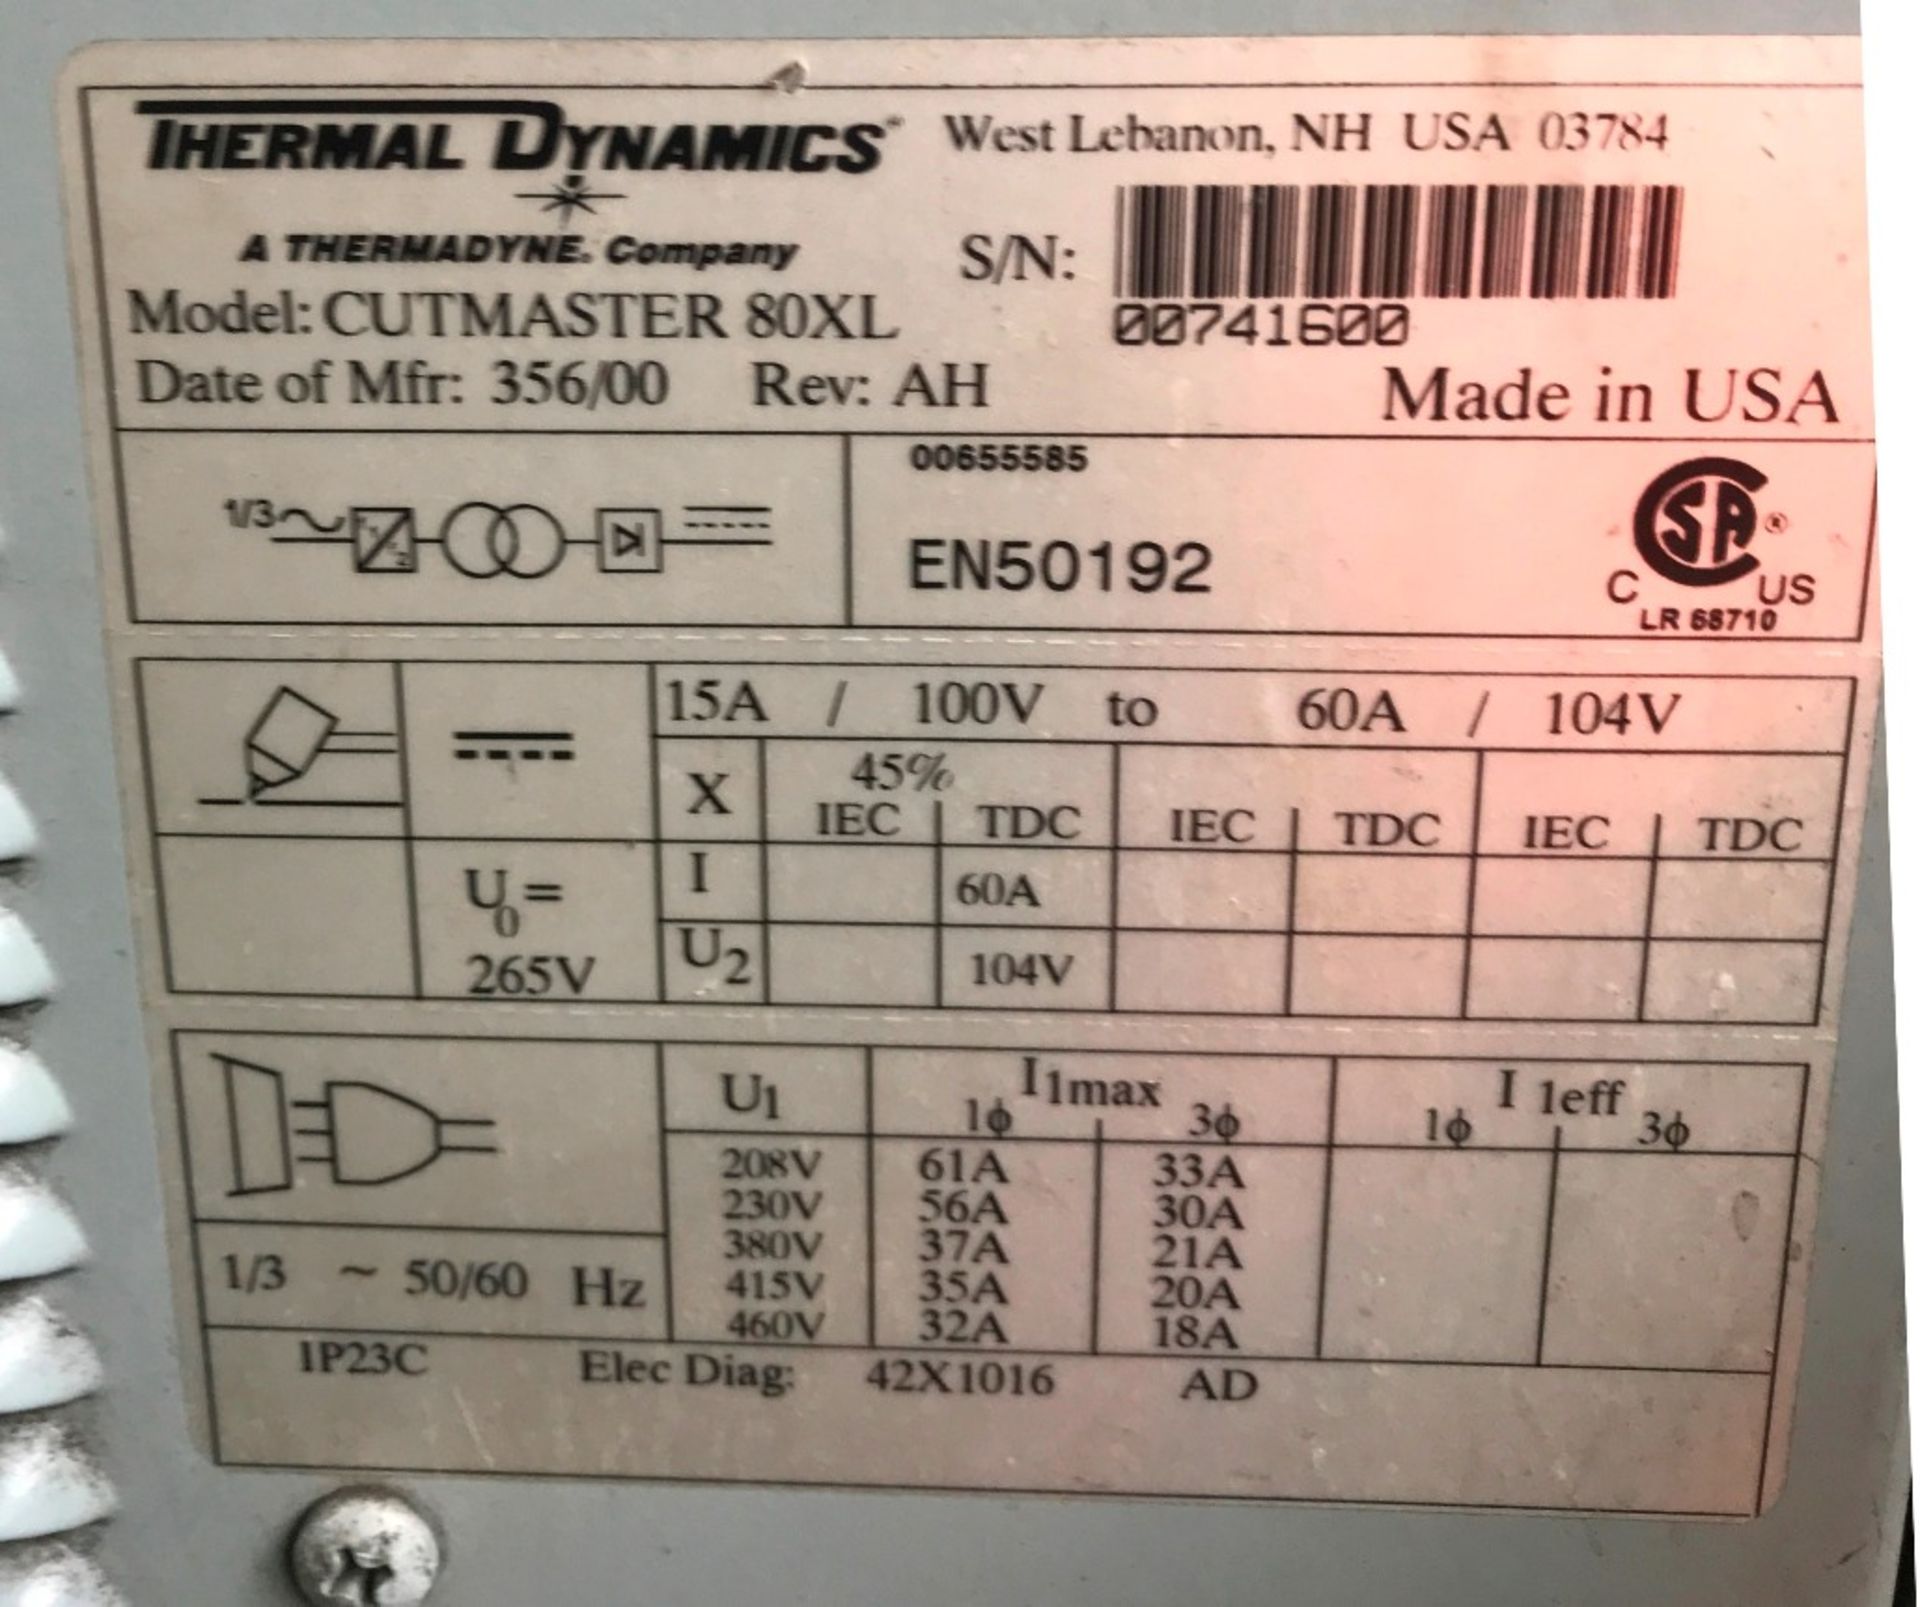 Thermal Dynamics Cutmaster 80XL Plasma Cutter - Image 5 of 5